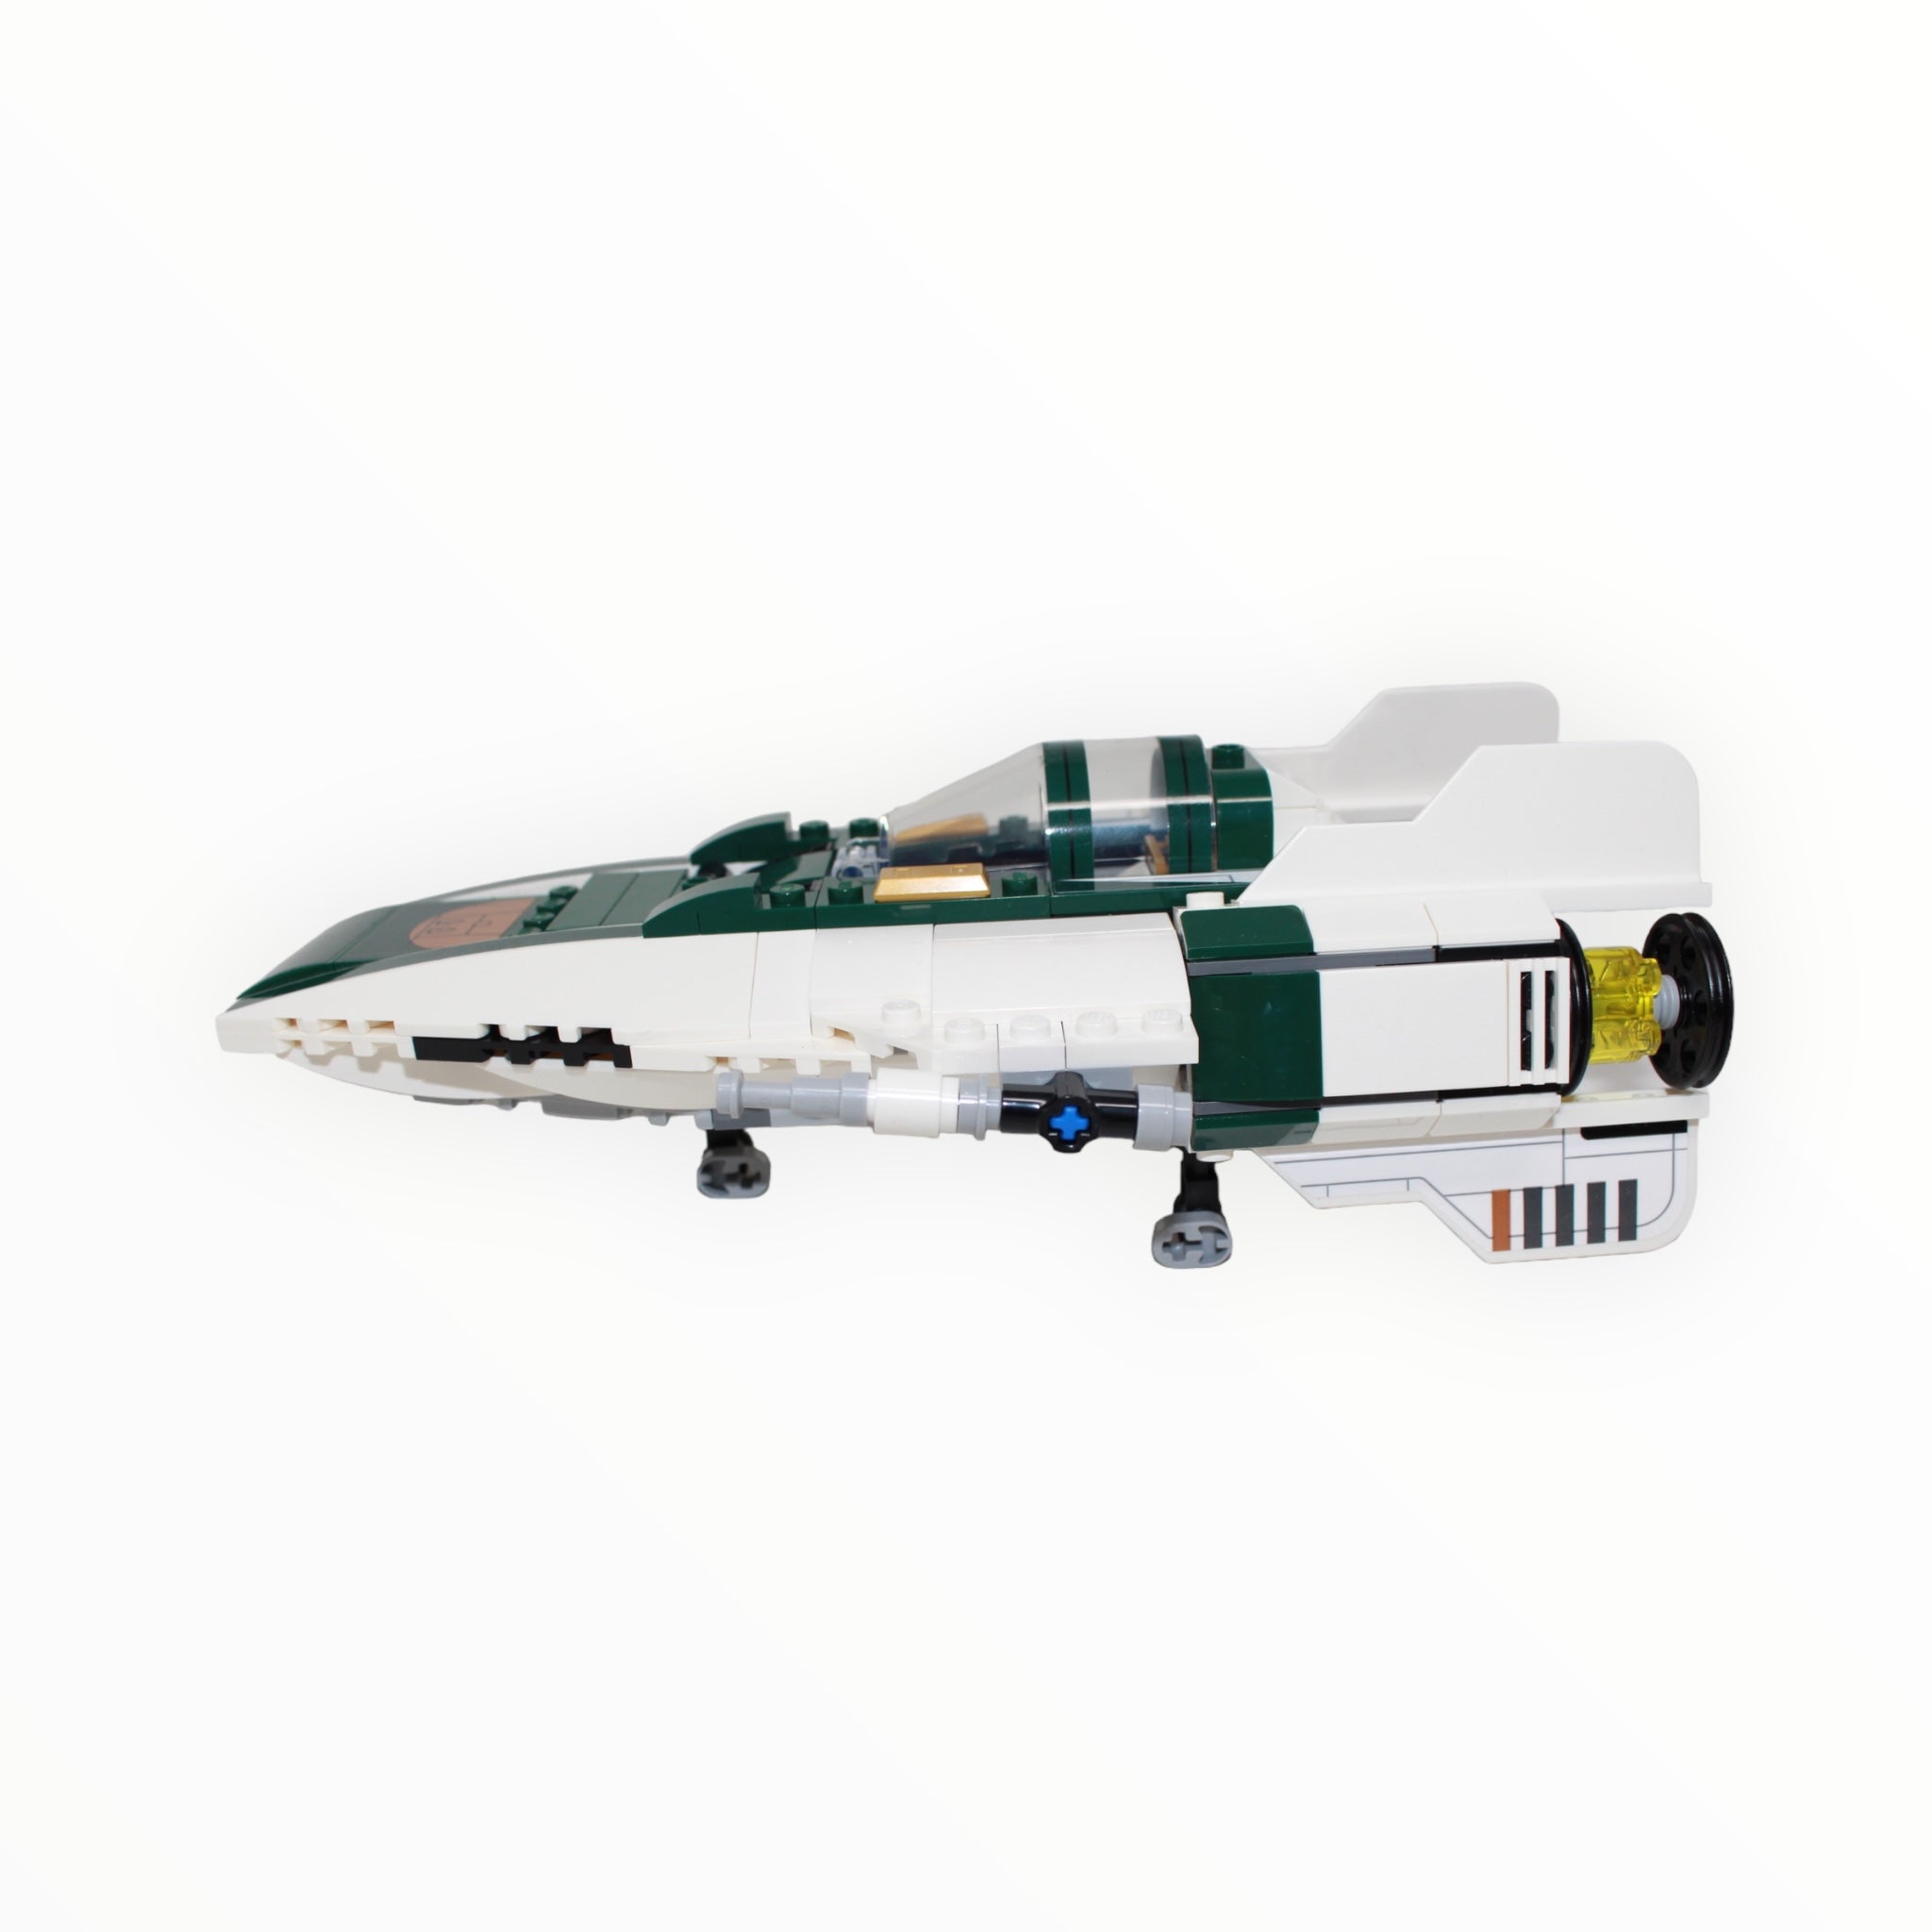 Used Set 75248 Star Wars Resistance A-Wing Starfighter